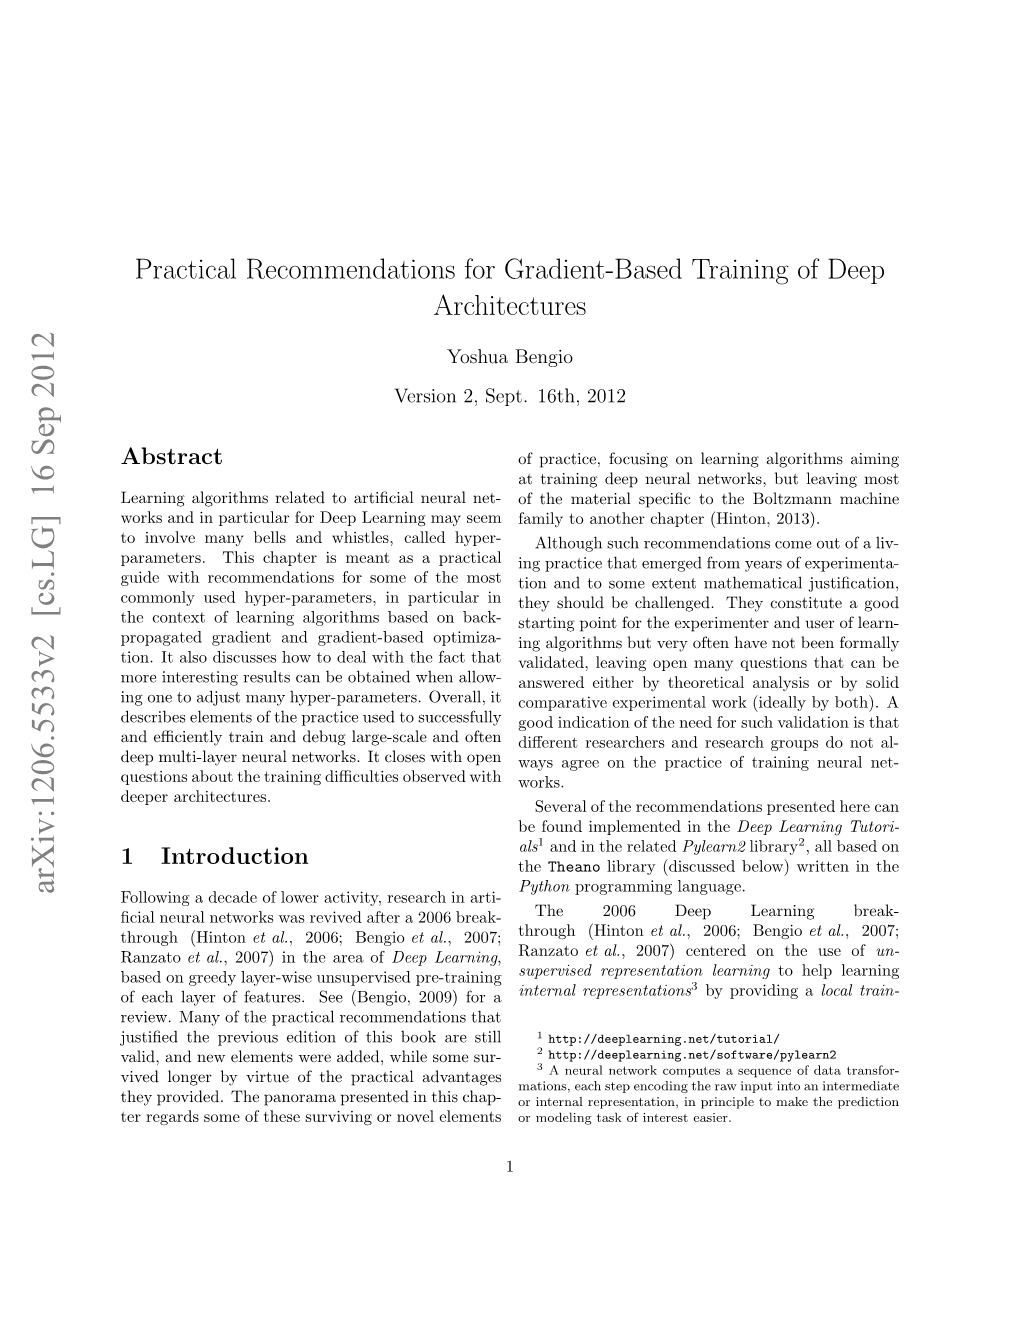 Practical Recommendations for Gradient-Based Training of Deep